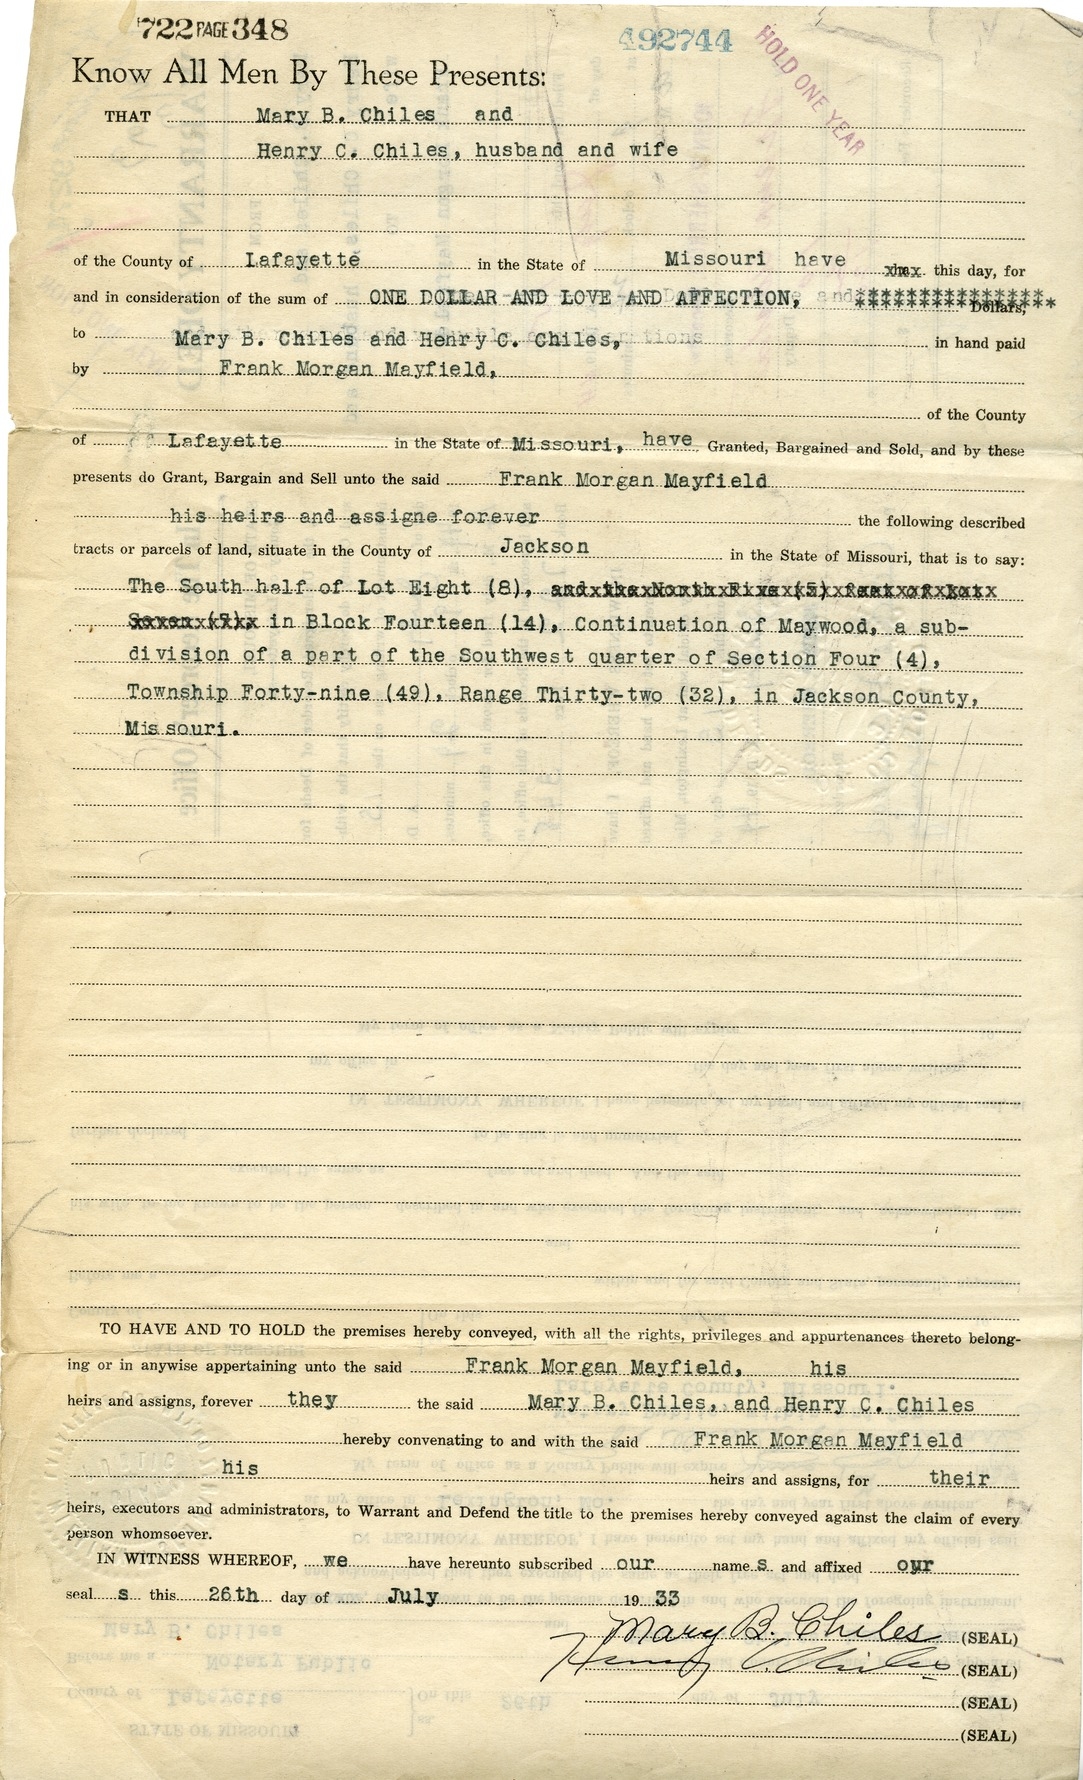 Warranty Deed from Mary B. Chiles and Henry C. Chiles to Frank Morgan Mayfield